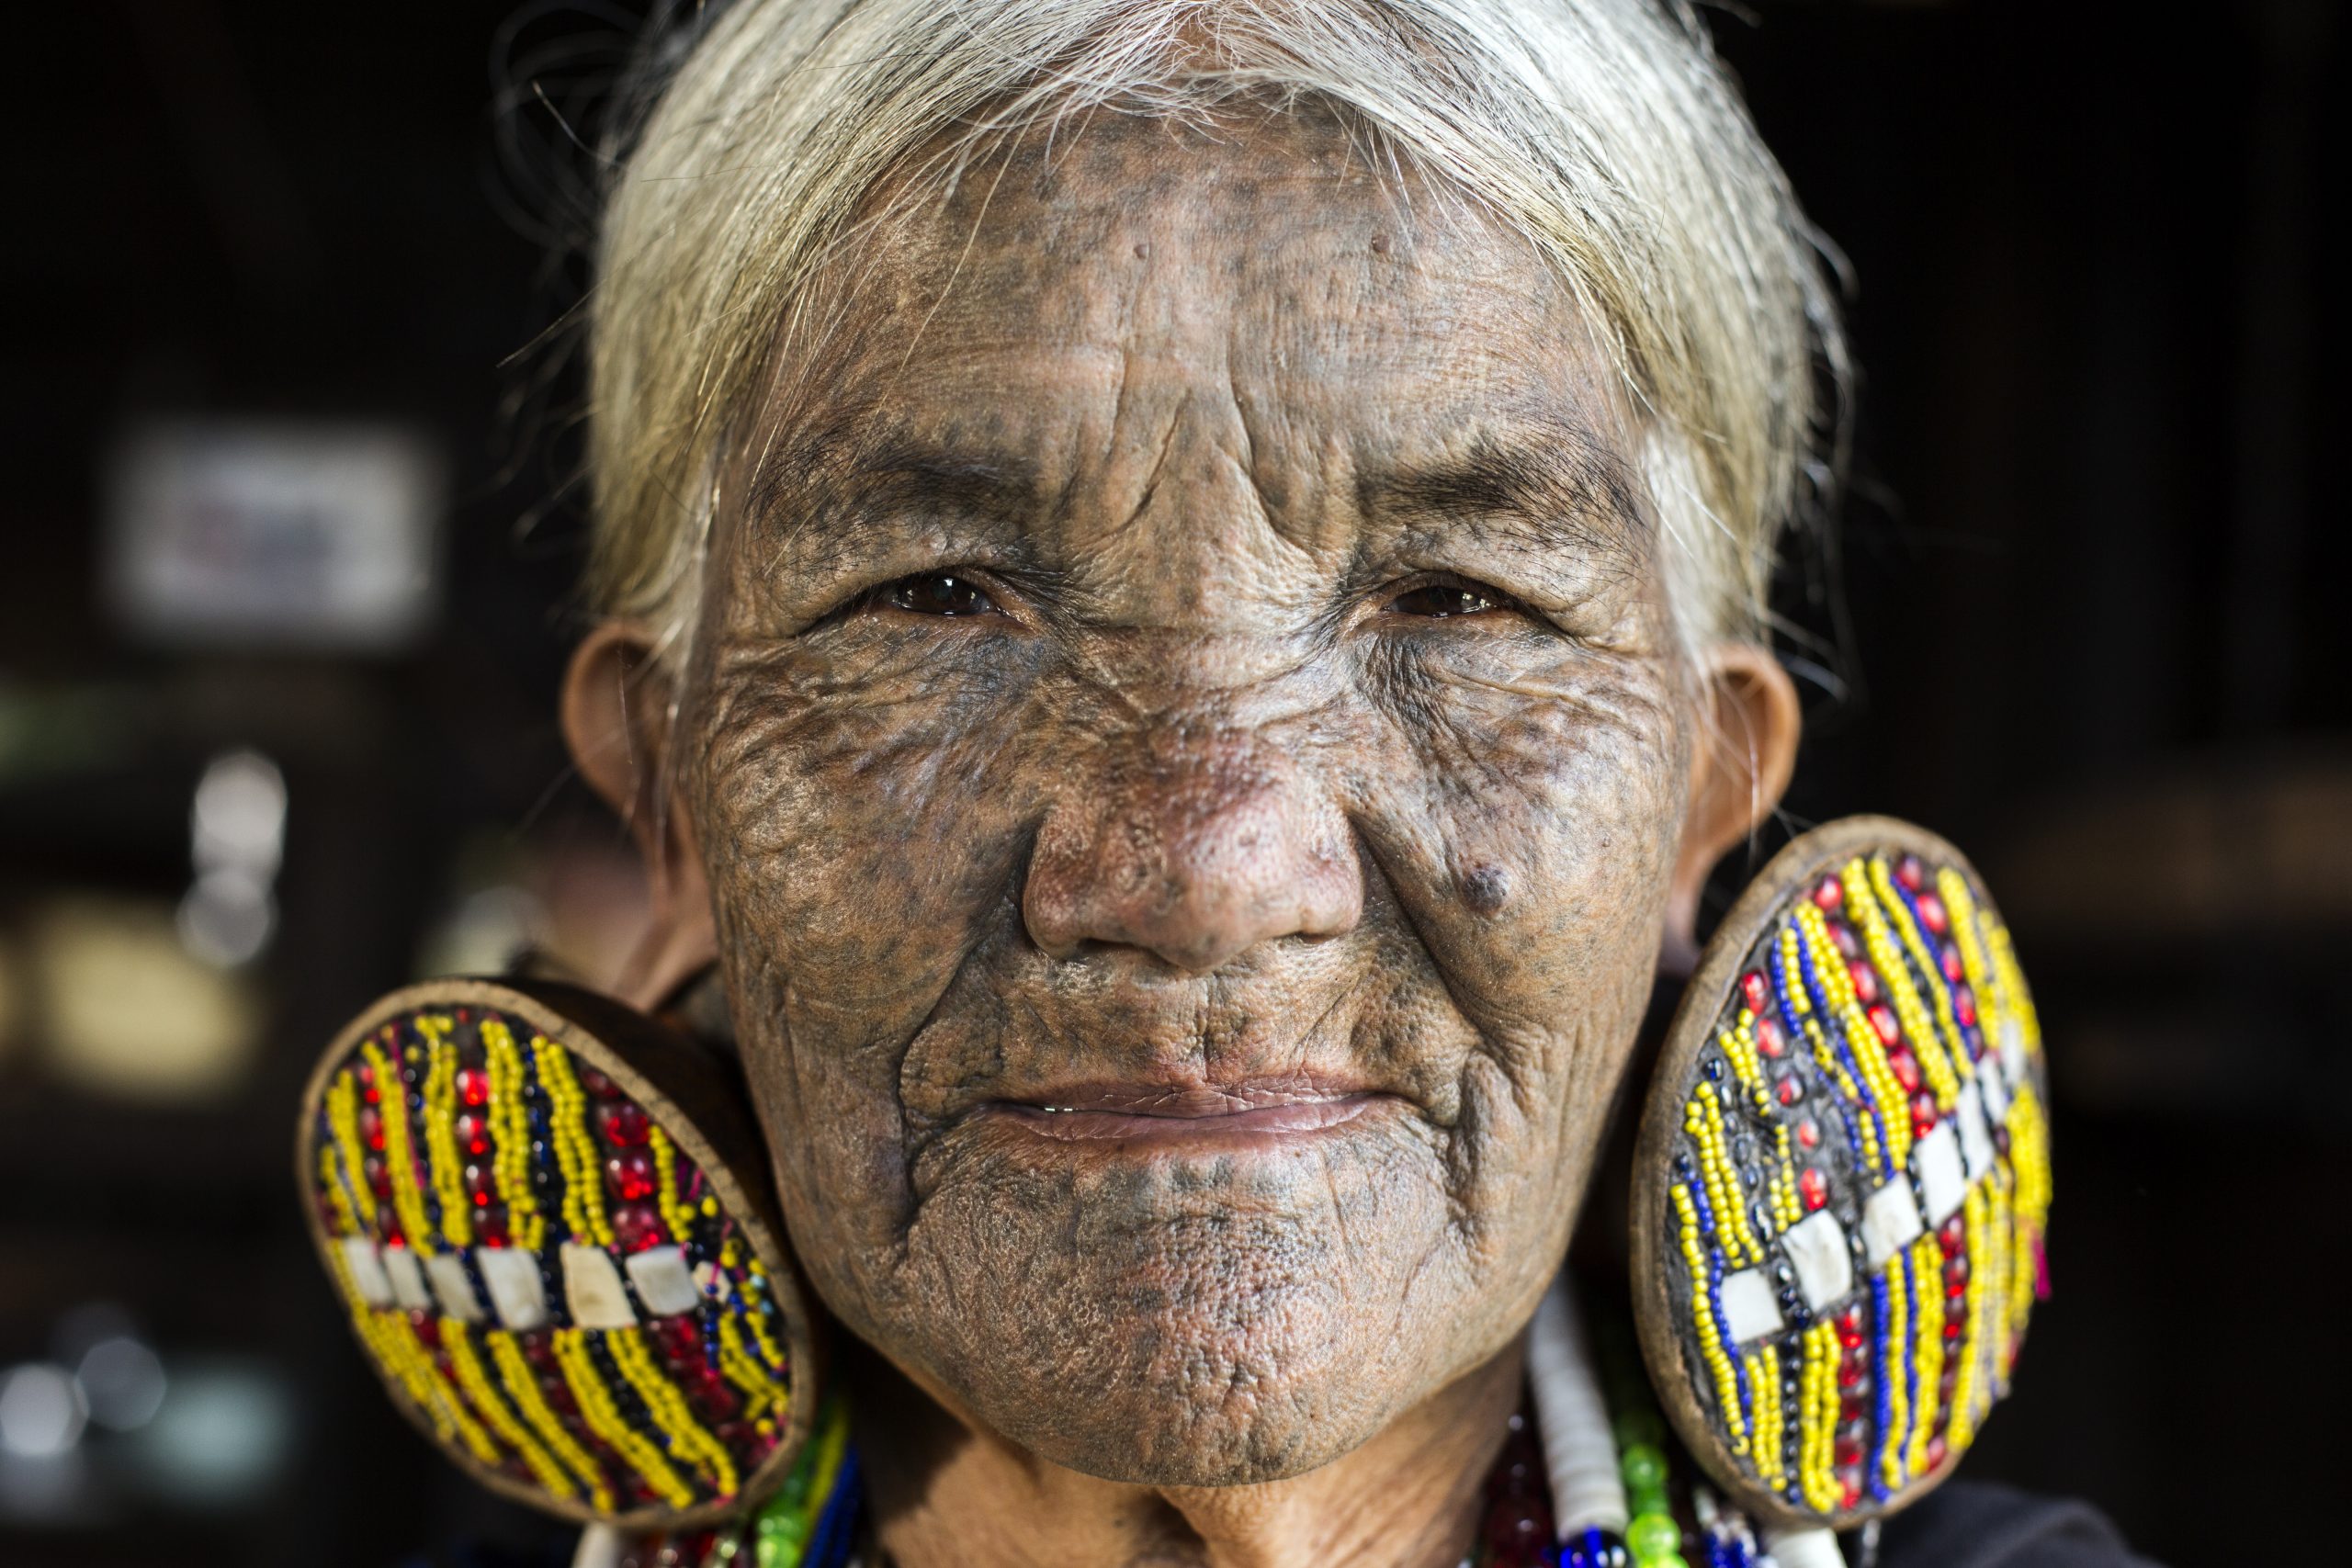 Mindat, Myanmar - December 6th, 2015: Chin tribe tattooed faced woman (Daai) is relaxing at home in Mindat while wearing her exceptionally large traditional earrings and traditional tribal dress. The practice of facial tattooing was outlawed in the 1960's and is usually only seen on old generation women. Chin people, also known as the Kakis are a number of Tibeto-Burman tribal people.